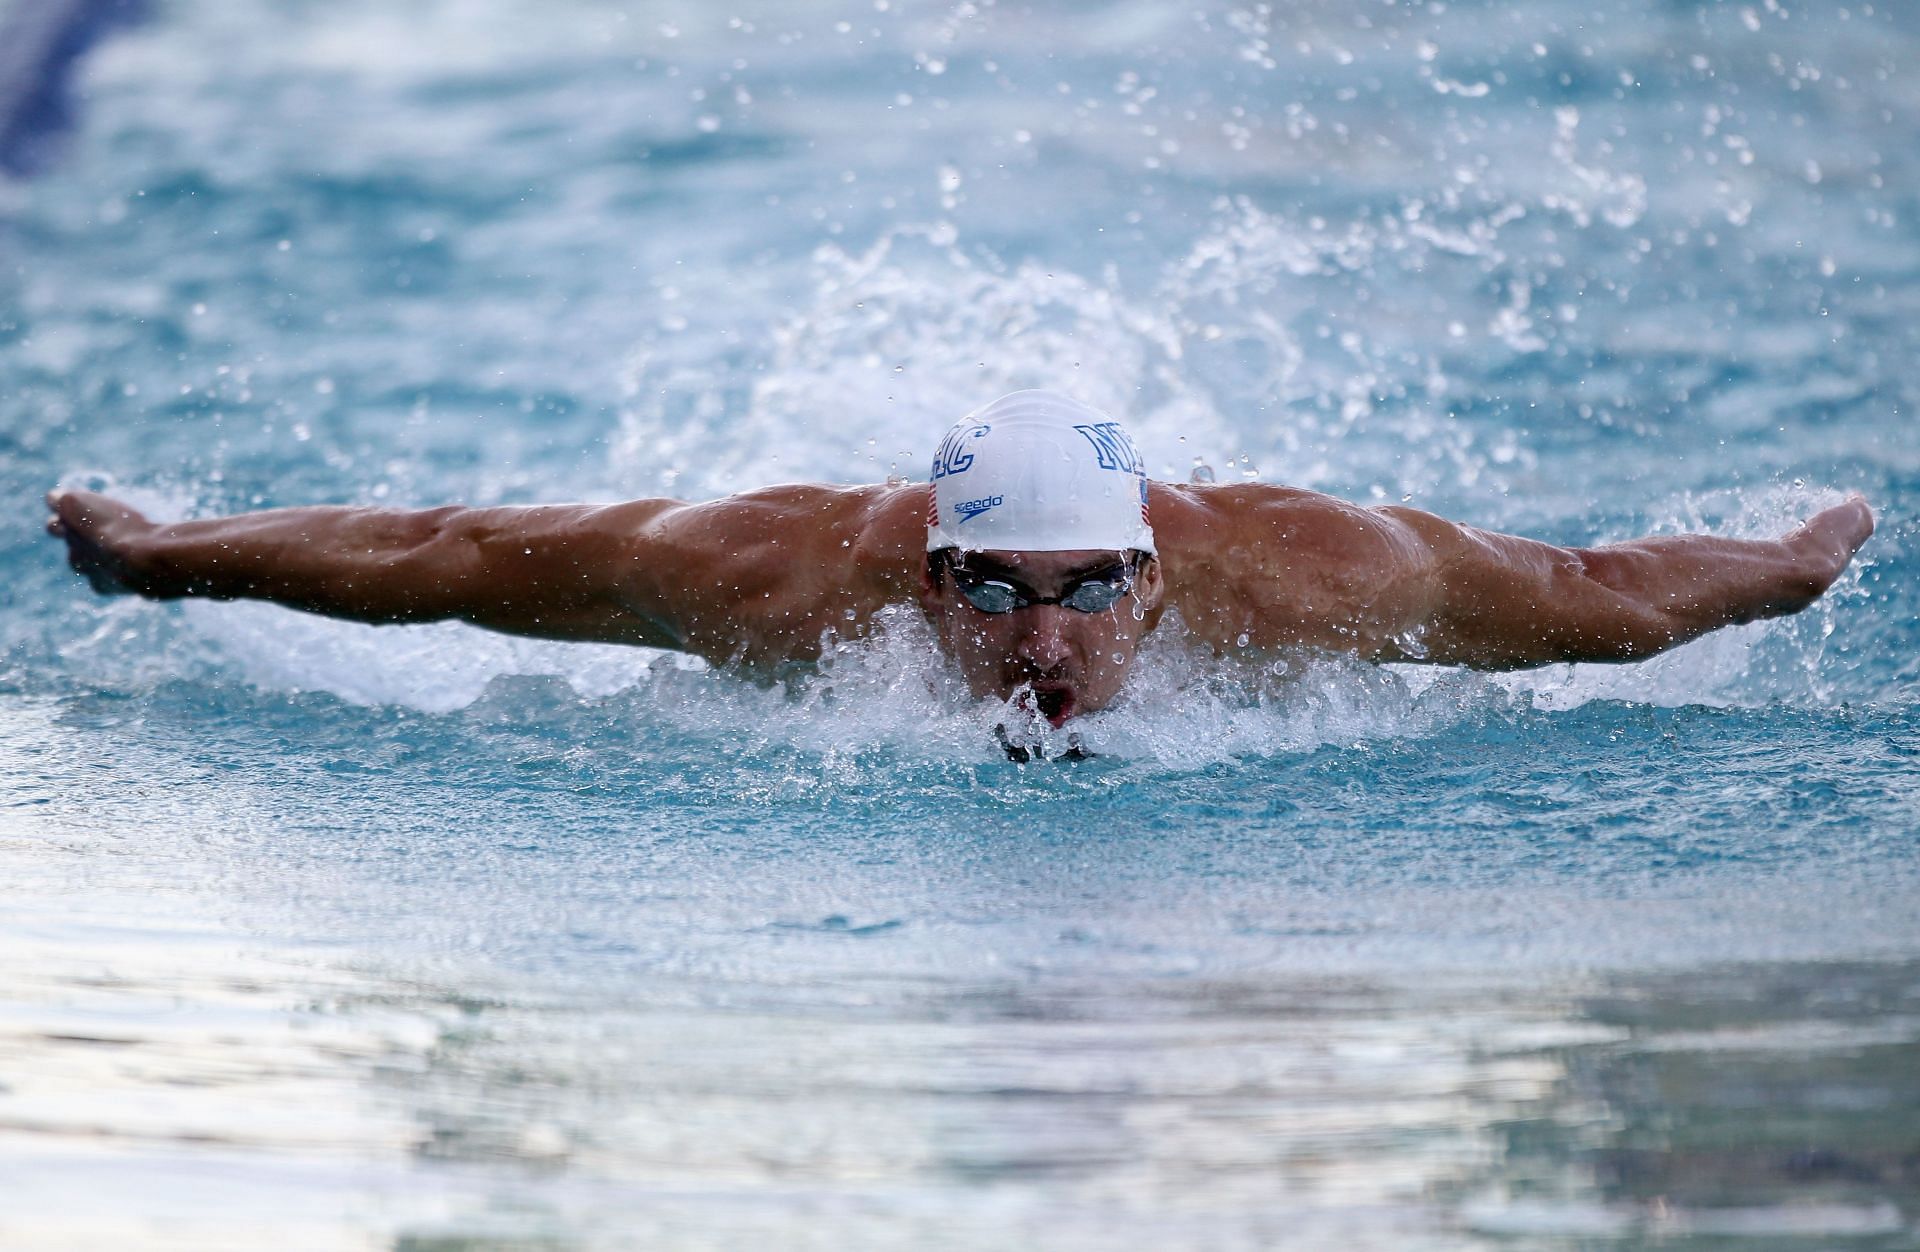 Michael Phelps competes in the mens 100 meter butterfly final during day 2 of the Santa Clara International Grand Prix at George F. Haines International Swim Center on June 17, 2011 in Santa Clara, California. (Photo by Ezra Shaw/Getty Images)